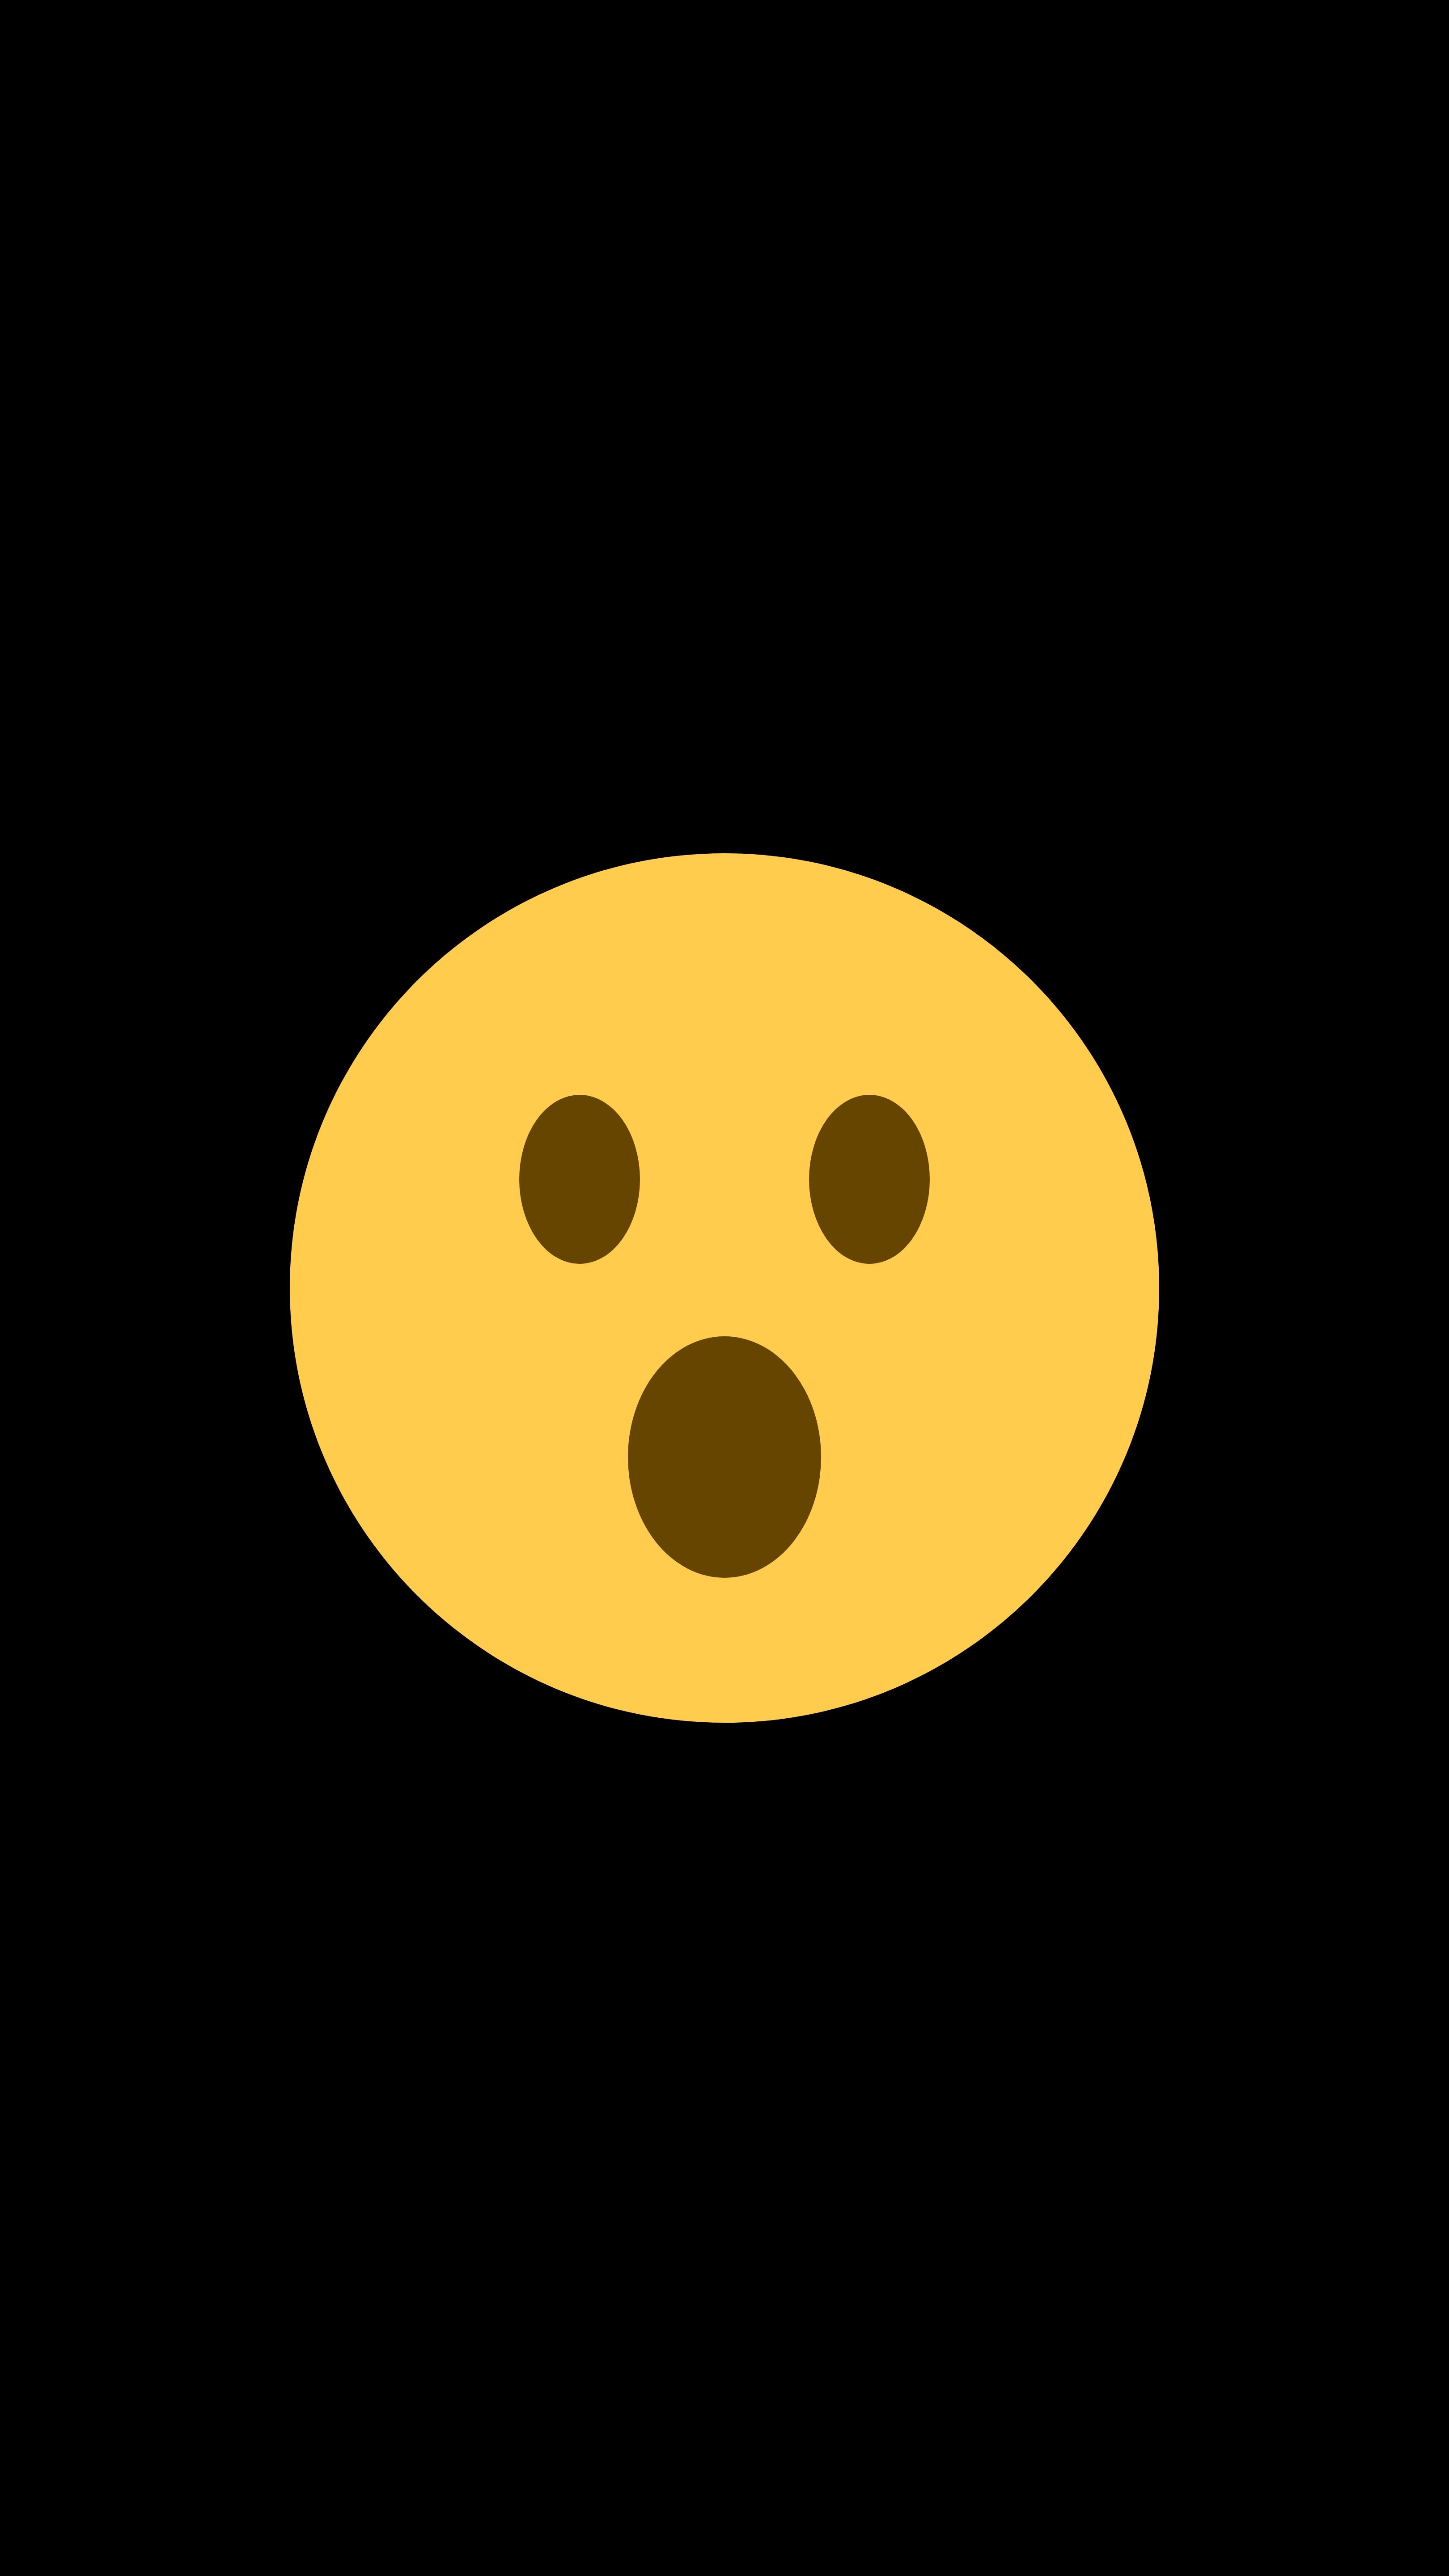 Popular Smiley images for mobile phone